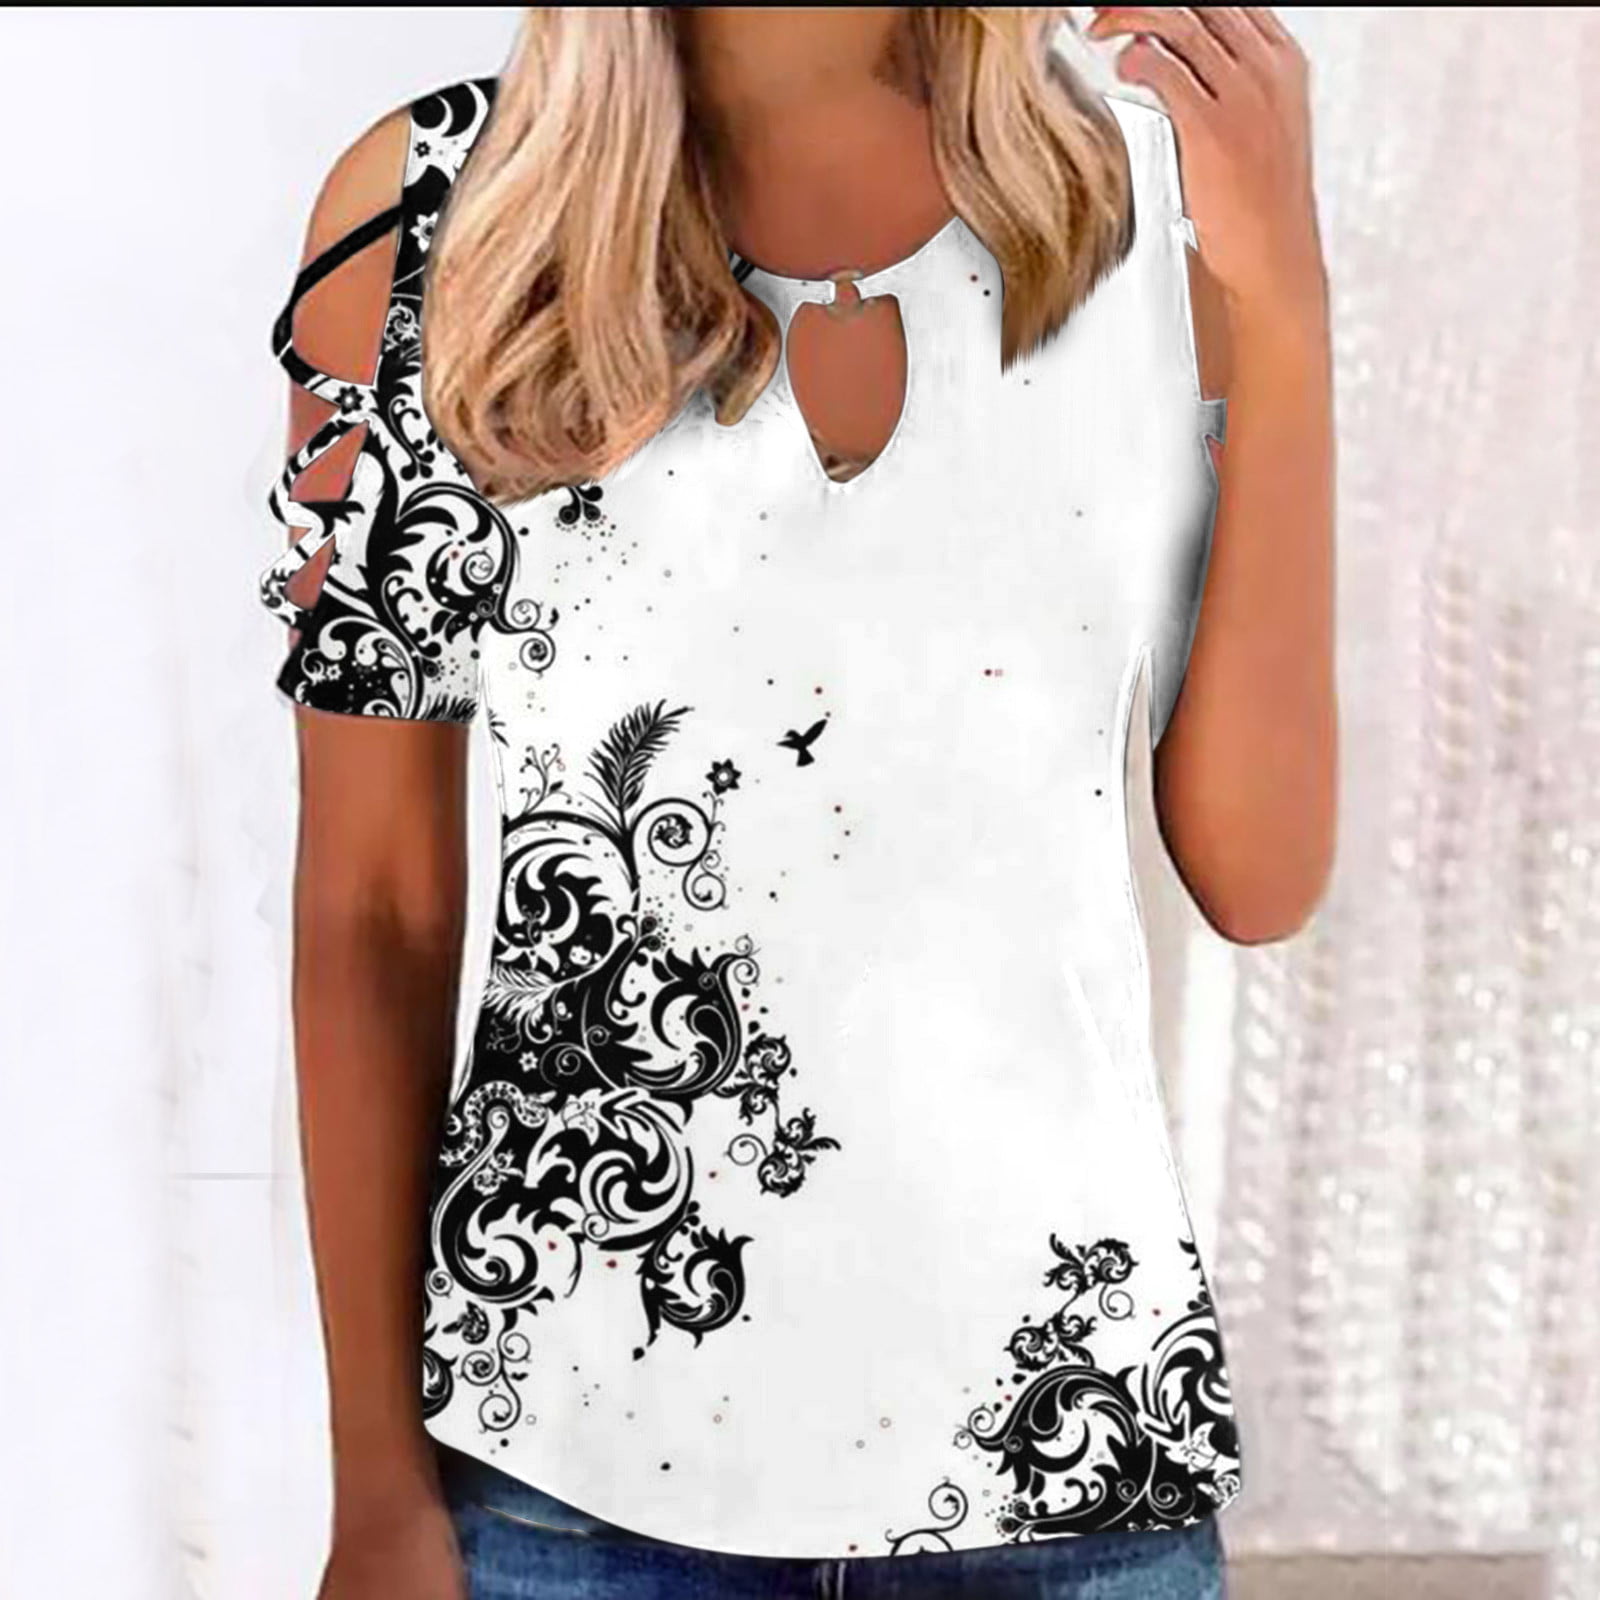 NKOOGH Shirt for Overnight Delivery Items Prime Tee Shirt Women Women  Floral Printed Short Sleeve Strappy Cold Shoulder T Shirt Tops Blouses